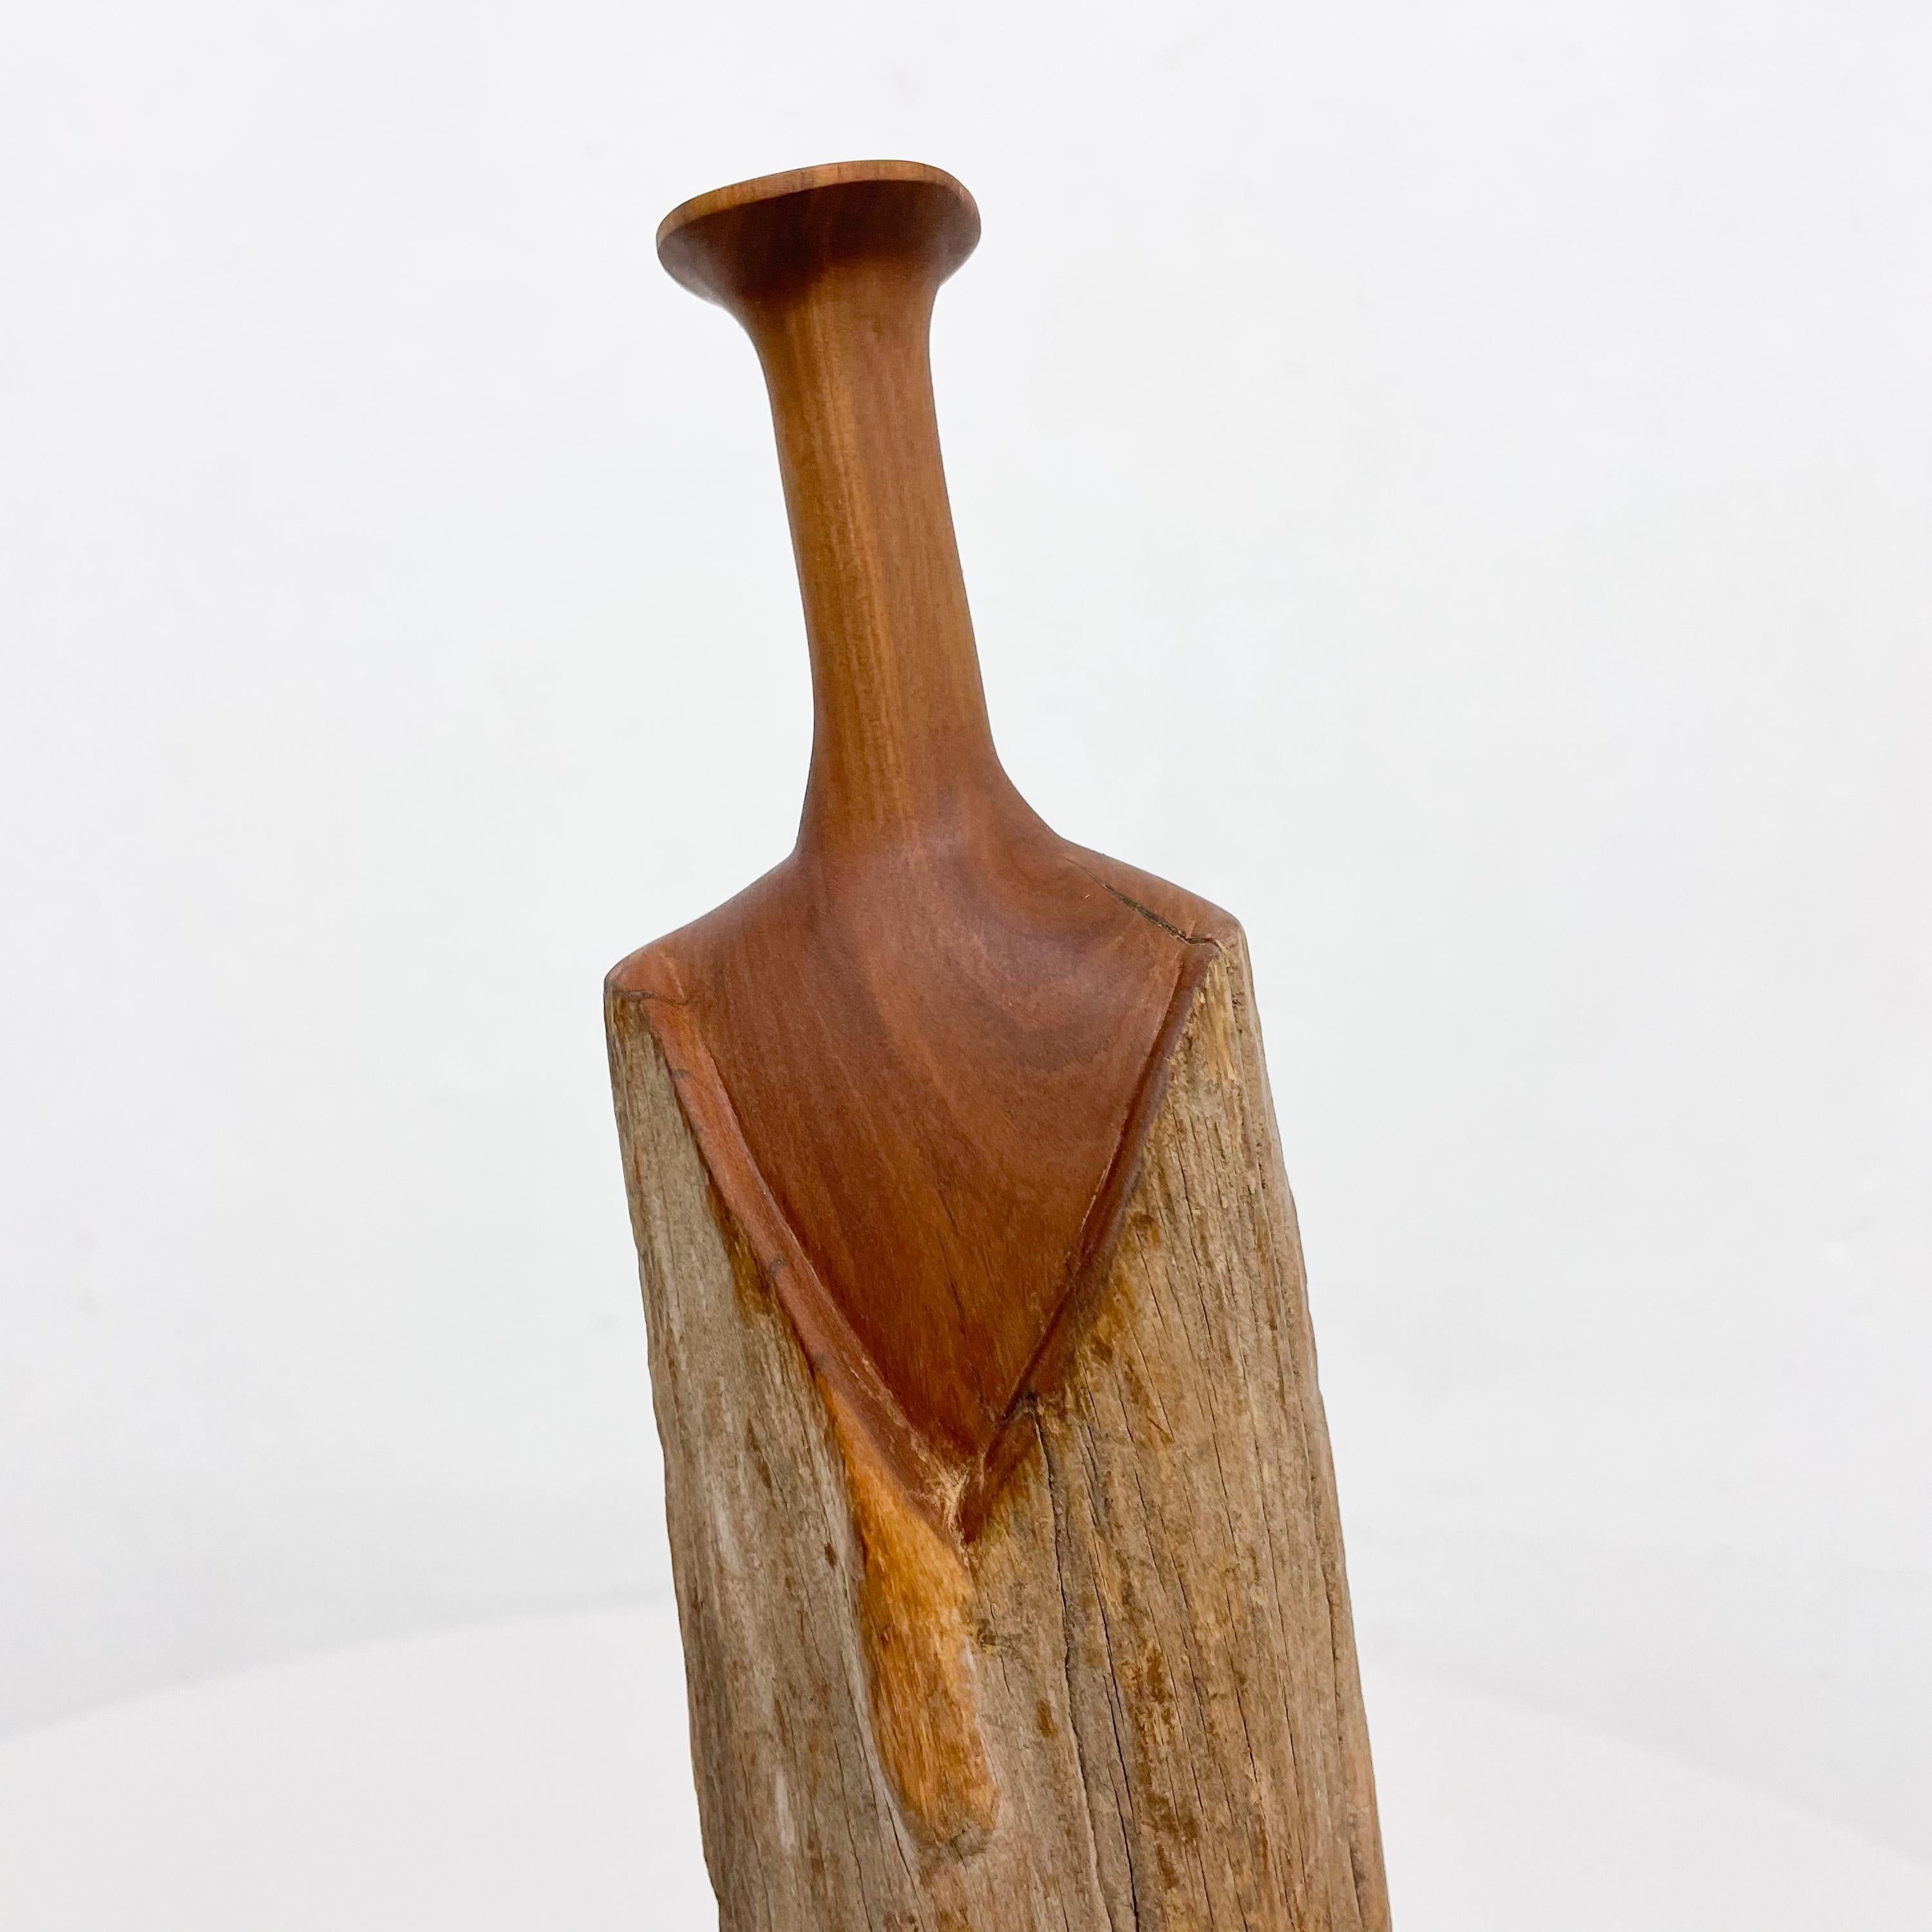 Sculptural Studio Vase Wood Weed Pot Midcentury Modern Organic Free Form Design.
11.75 Tall x 3 W x 2D
Original Unrestored Vintage Condition.
Refer to images please.